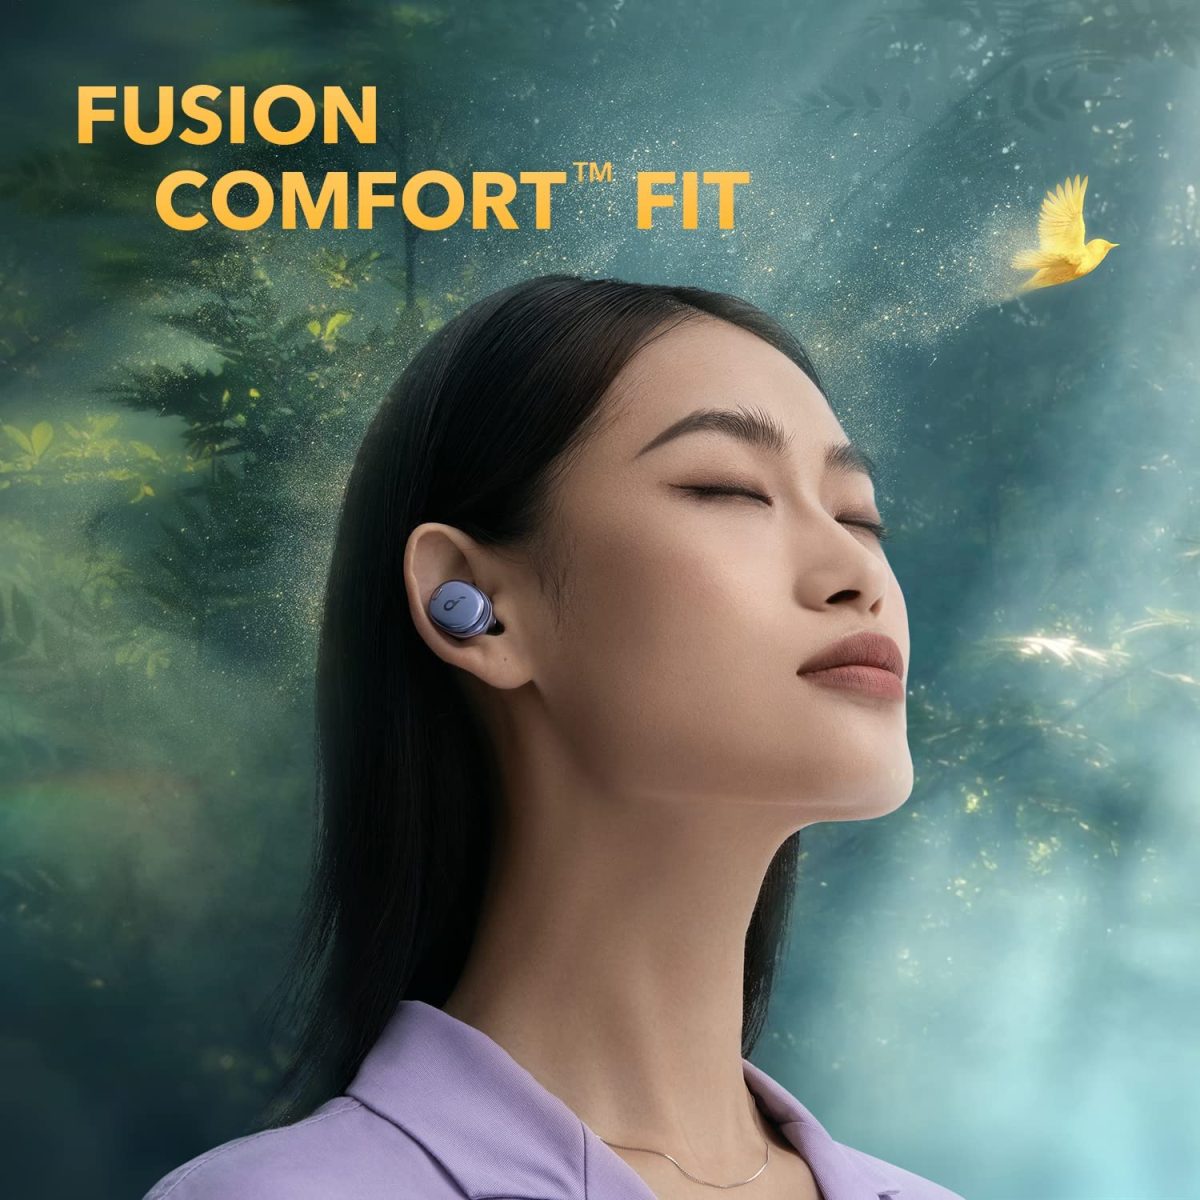 71Zonyozel. Ac Sl1500 Soundcore &Lt;H1 Id=&Quot;Title&Quot; Class=&Quot;A-Size-Large A-Spacing-None&Quot;&Gt;Anker Soundcore Liberty Air 3 Pro True Wireless Earbuds - Dusk Purple&Lt;/H1&Gt; Https://Www.youtube.com/Watch?V=Bguj4K07Ruy &Lt;Ul&Gt; &Lt;Li&Gt;&Lt;B&Gt;Acaa 2.0:  &Lt;/B&Gt;Our Exclusive Coaxial Dual Driver Technology Delivers High And Low Frequency Sound Directly To Your Ear Without Interference. Its Wide Soundstage Is Detailed And Spacious, Bass Has A Deep Punch, Mids Are Luscious, And Treble Sparkles.&Lt;/Li&Gt; &Lt;Li&Gt;&Lt;B&Gt;Personalized Noise Cancelling:  &Lt;/B&Gt;Standard Noise Cancelling Only Adjusts Noise Based On Data. Hearid Anc Analyzes Your Ears And Level Of In-Ear Pressure To Create A Tailored Profile That Optimizes Noise Reduction And Reduces External Sound To Suit Your Ears.&Lt;/Li&Gt; &Lt;Li&Gt;&Lt;B&Gt;Fusion Comfort Fit:  &Lt;/B&Gt;Liberty 3 Pro’s Earbuds Have A Triple-Point Ergonomic Shape And Built-In Ear Pressure Relief For All-Day Comfort. 4 Sizes Of Liquid Silicone Ear Tips And Flexible Ear Wings Ensure You Get A Strong Seal And Secure Grip.&Lt;/Li&Gt; &Lt;Li&Gt;&Lt;B&Gt;Up To 32 Hours Of Playtime:  &Lt;/B&Gt;Enjoy Up To 8 Hours Of Music From A Single Charge, Plus Get 3 Full Charges From The Compact Charging Case To Extend The Playtime Even Further. Recharge The Case Via Usb-C Cable Or Wireless Charger.&Lt;/Li&Gt; &Lt;/Ul&Gt; &Lt;Pre&Gt;Warranty: Anker Product Warranty&Lt;/Pre&Gt; &Lt;Pre&Gt;&Lt;B&Gt;We Also Provide International Wholesale And Retail Shipping To All Gcc Countries: Saudi Arabia, Qatar, Oman, Kuwait, Bahrain.&Lt;/B&Gt;&Lt;/Pre&Gt; Earbuds Anker Soundcore Liberty Air 3 Pro True Wireless Earbuds - Dusk Purple